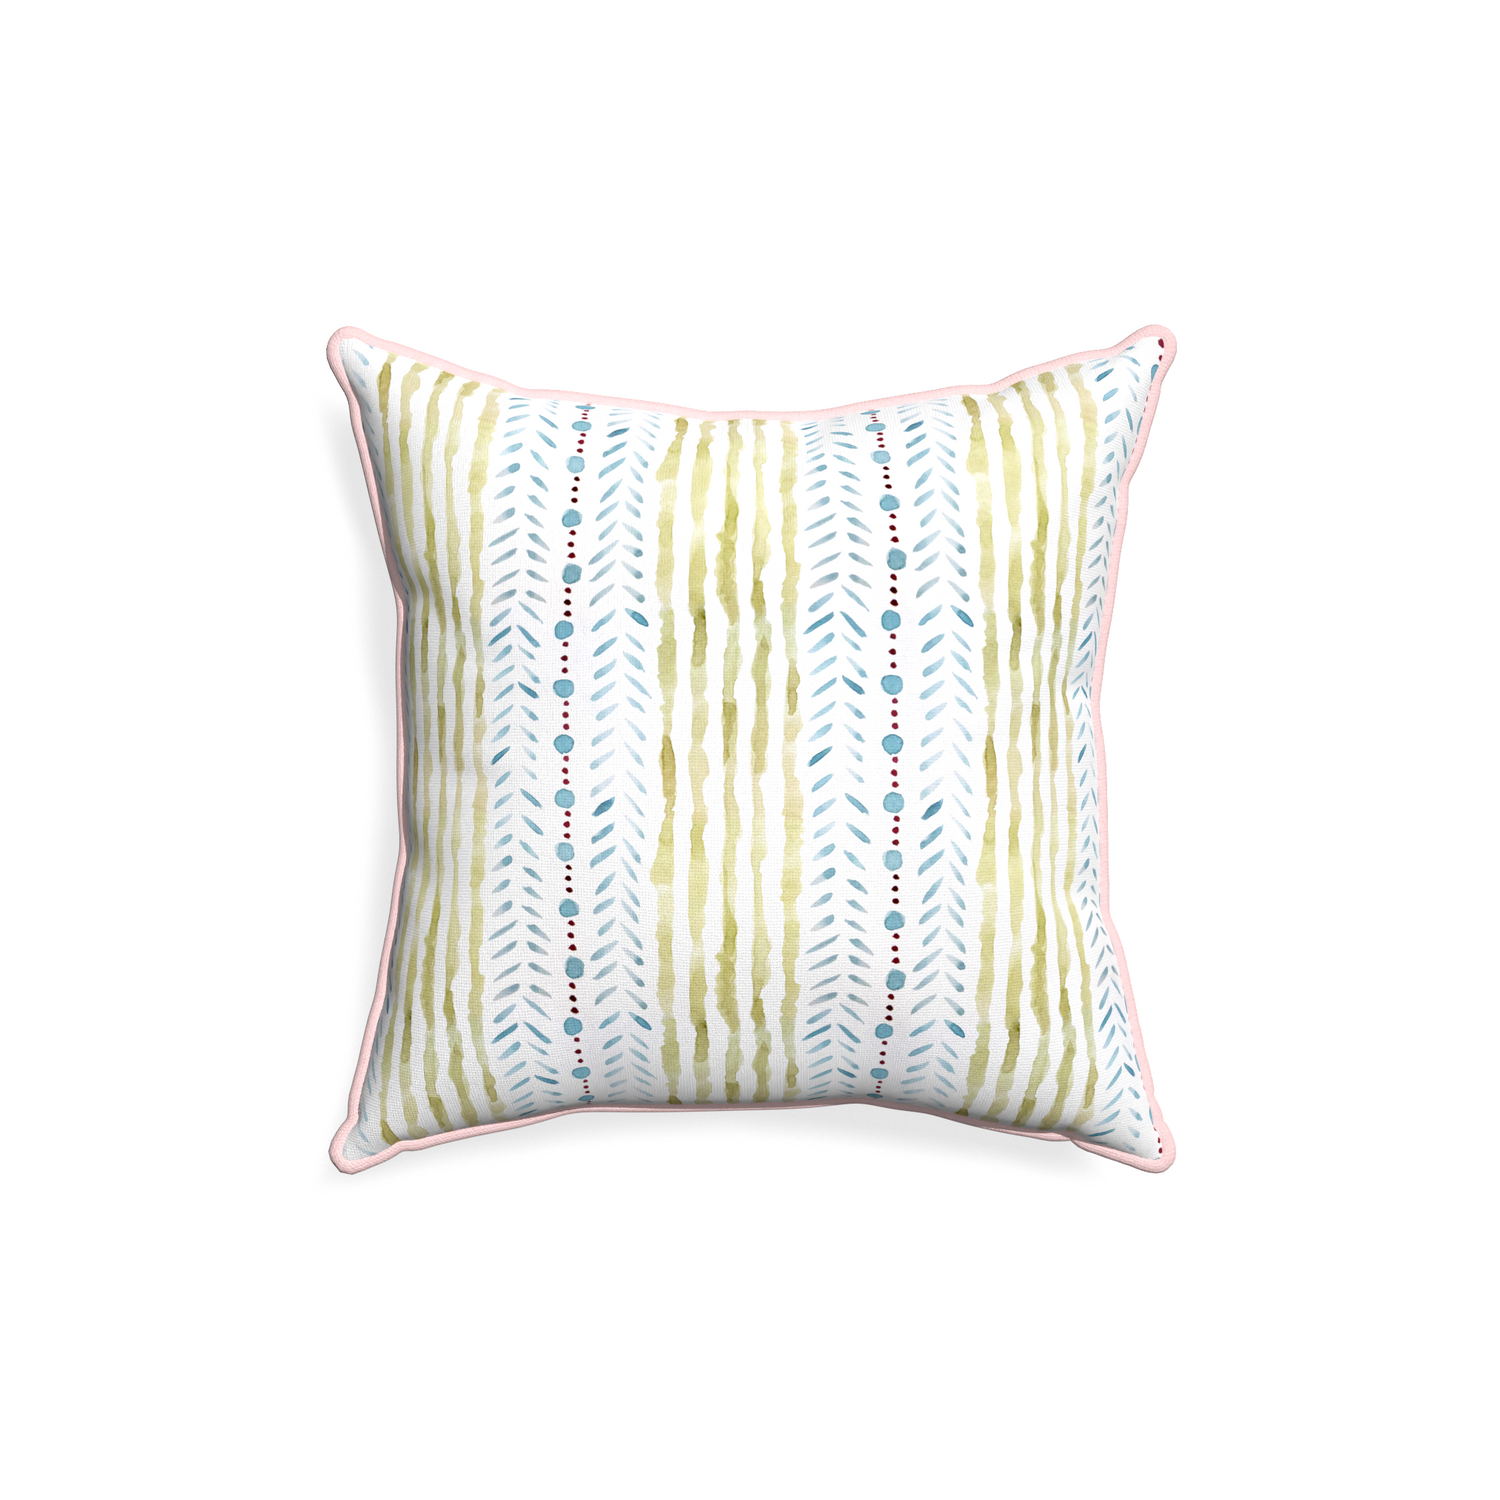 18-square julia custom pillow with petal piping on white background